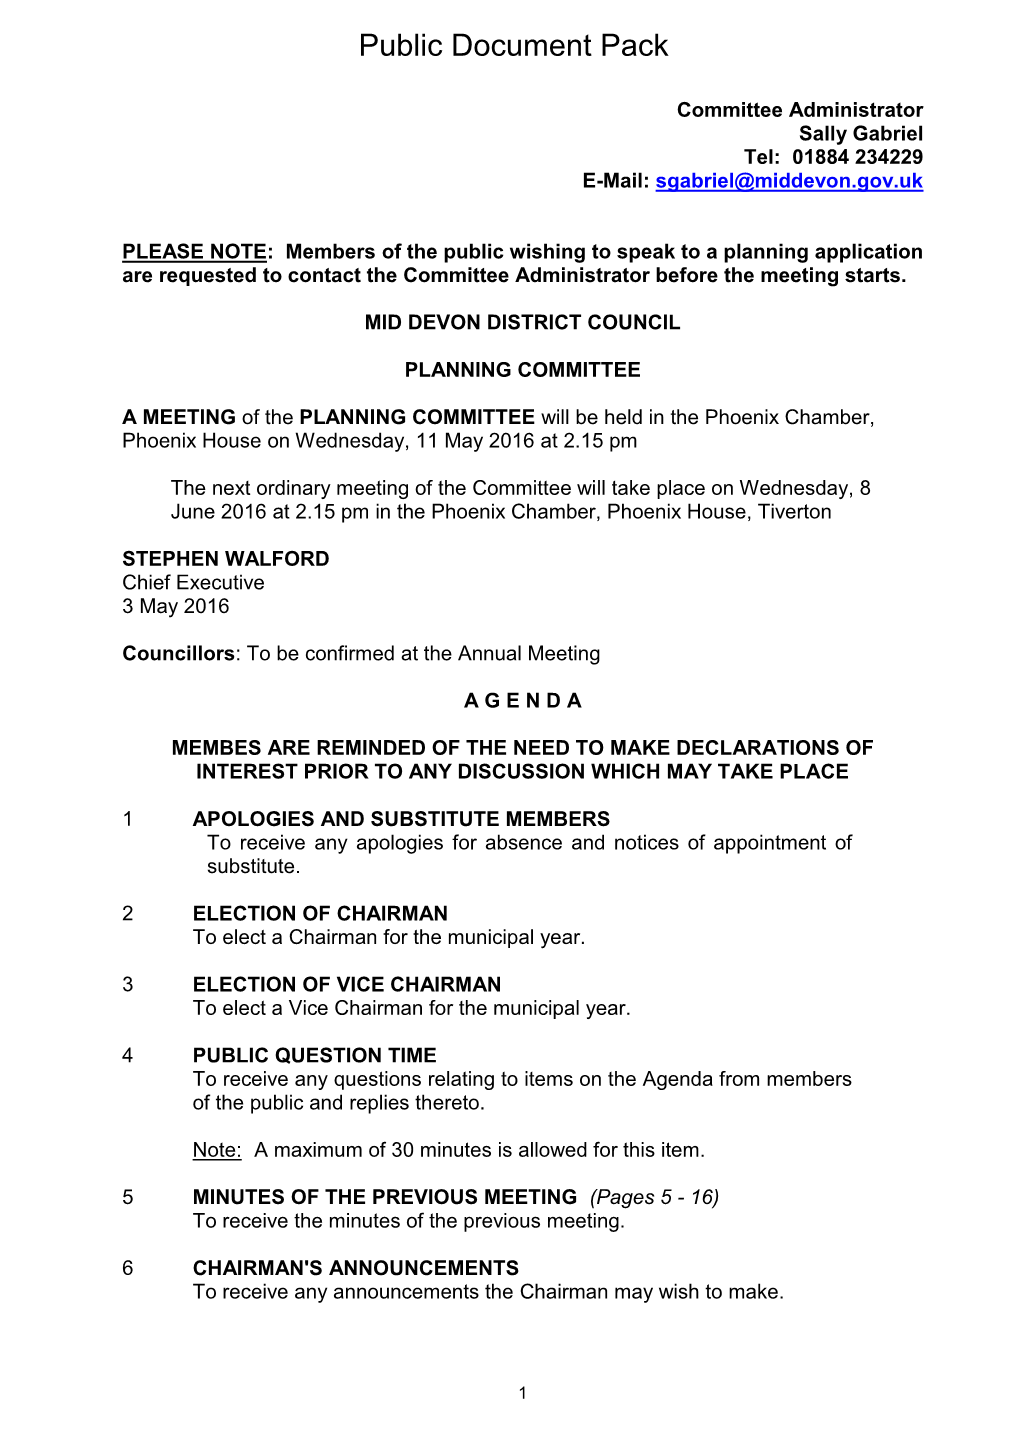 (Public Pack)Agenda Document for Planning Committee, 11/05/2016 14:15